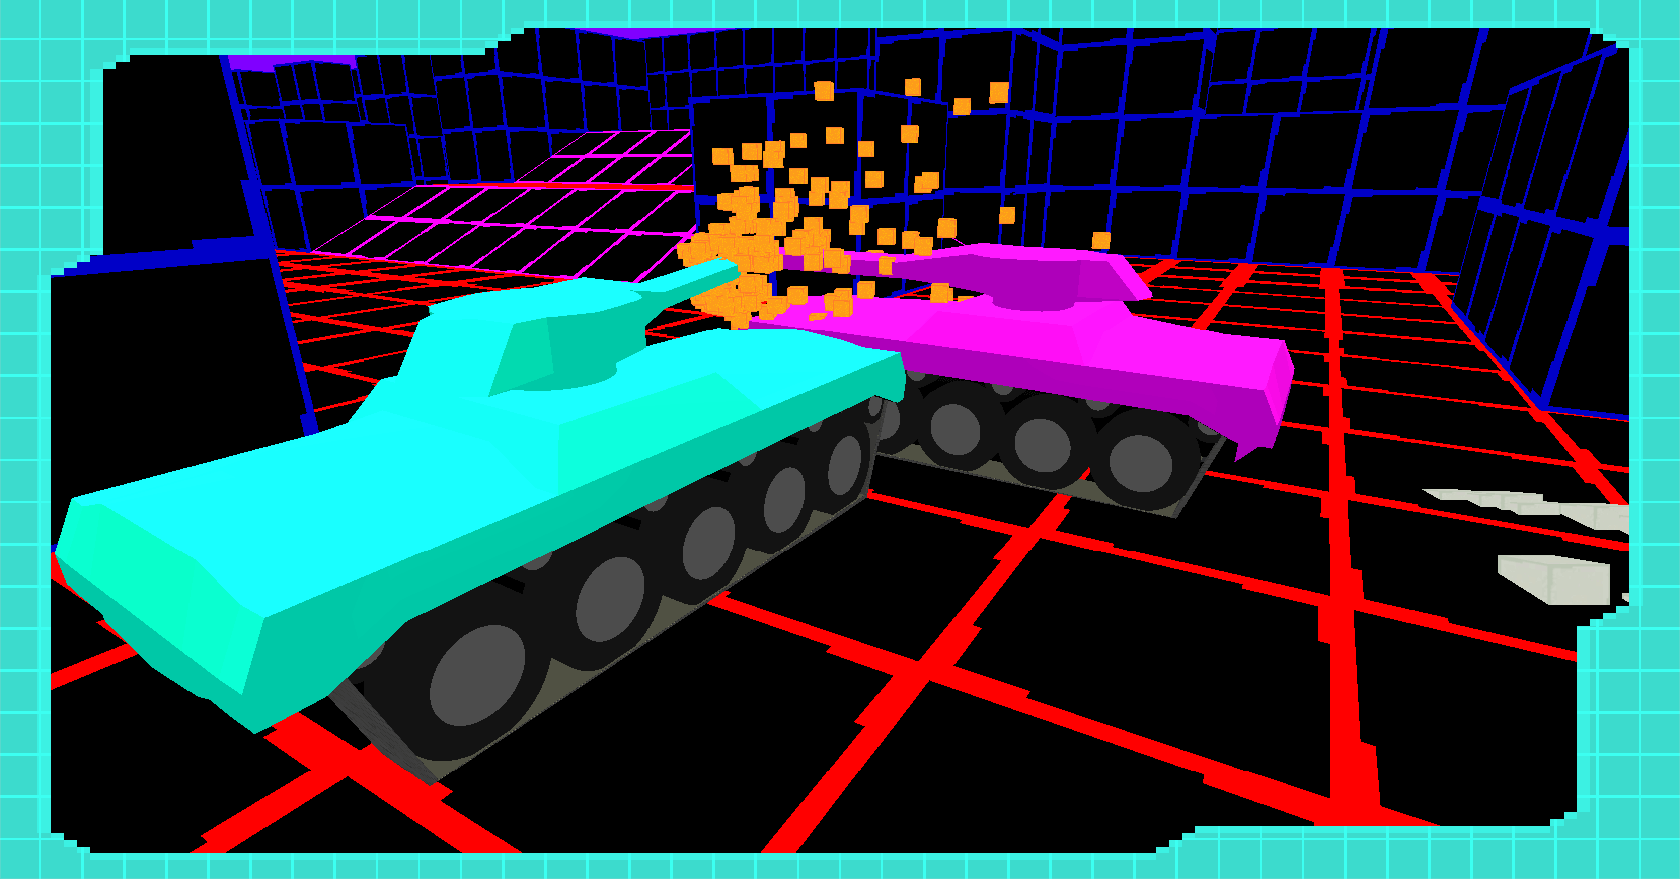 An image of my tank game's free for all gamemode